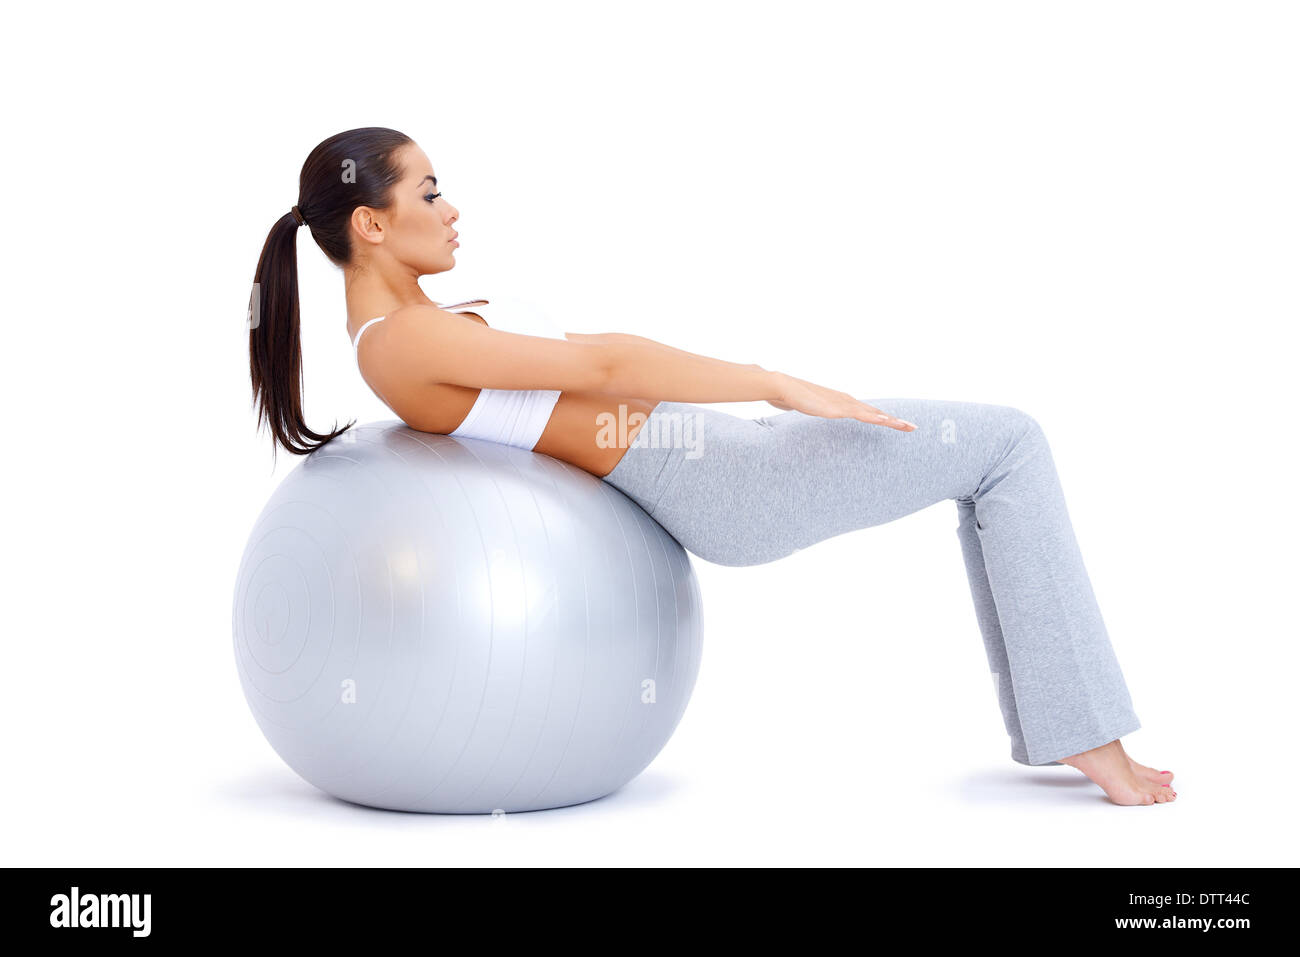 Doing abdominal muscles with fitness ball Stock Photo